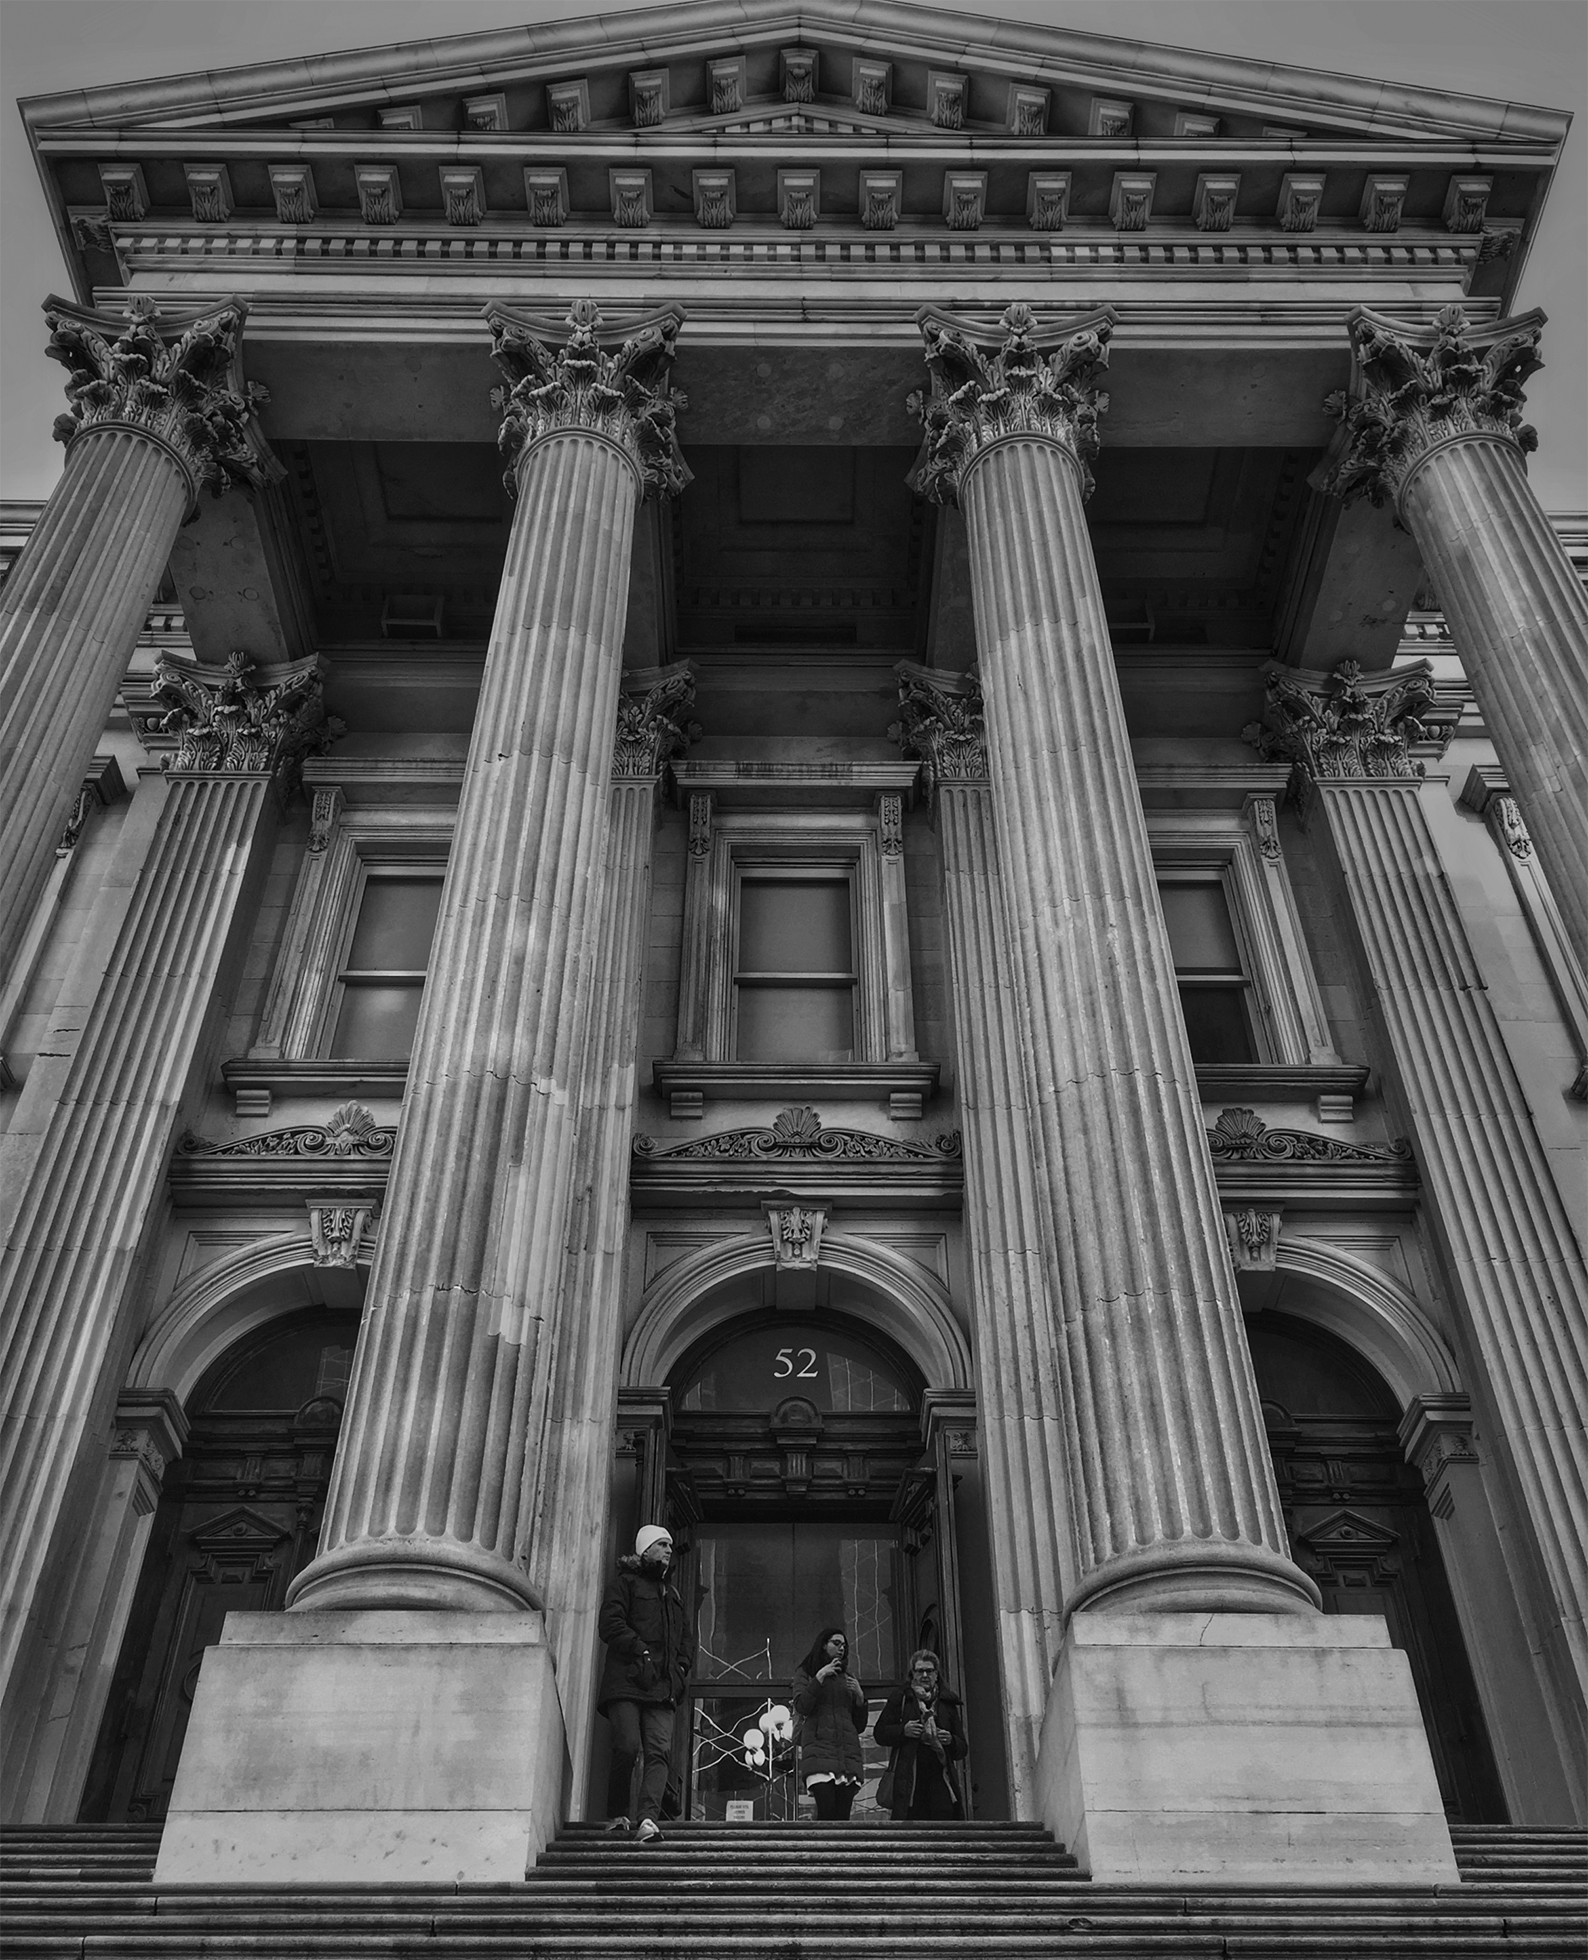 A looming court building designed with classic Greek architecture. A few people linger outside of the doors, looking small against the giant columns.